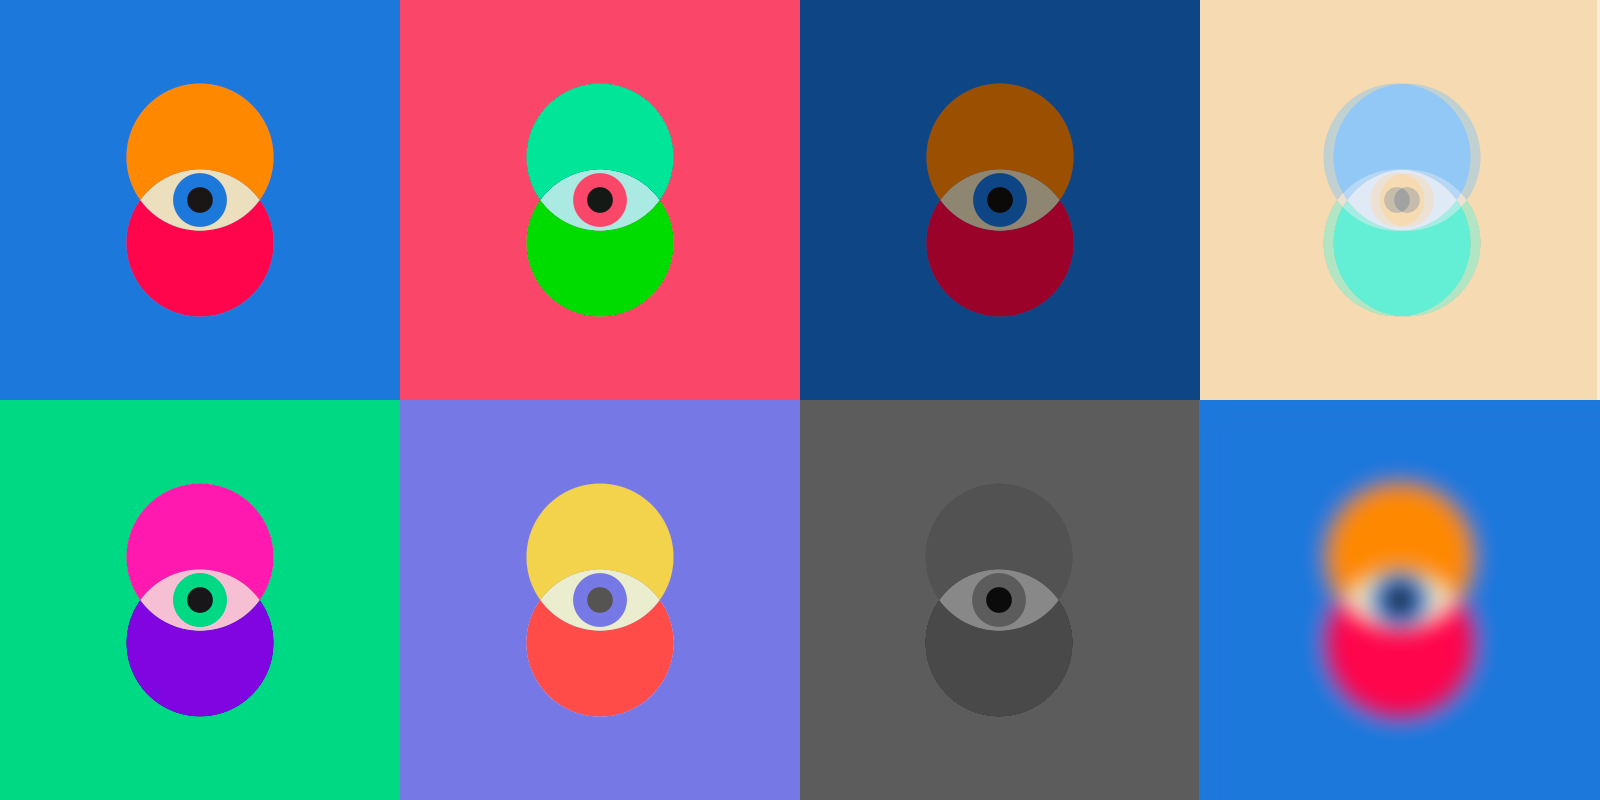 Eye illustration - Colour and vision changes